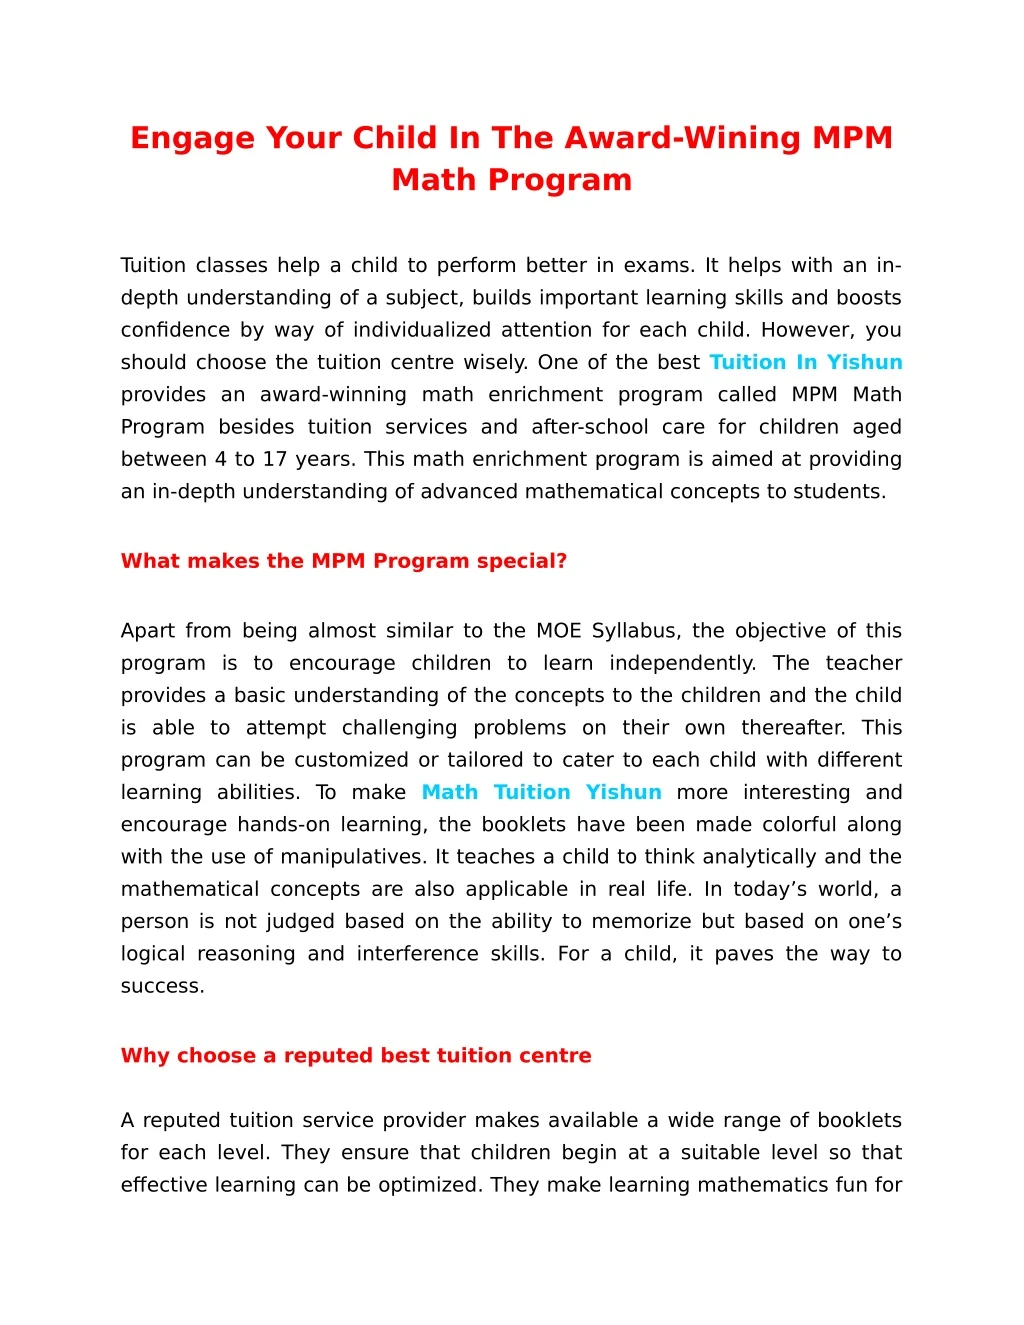 engage your child in the award wining mpm math